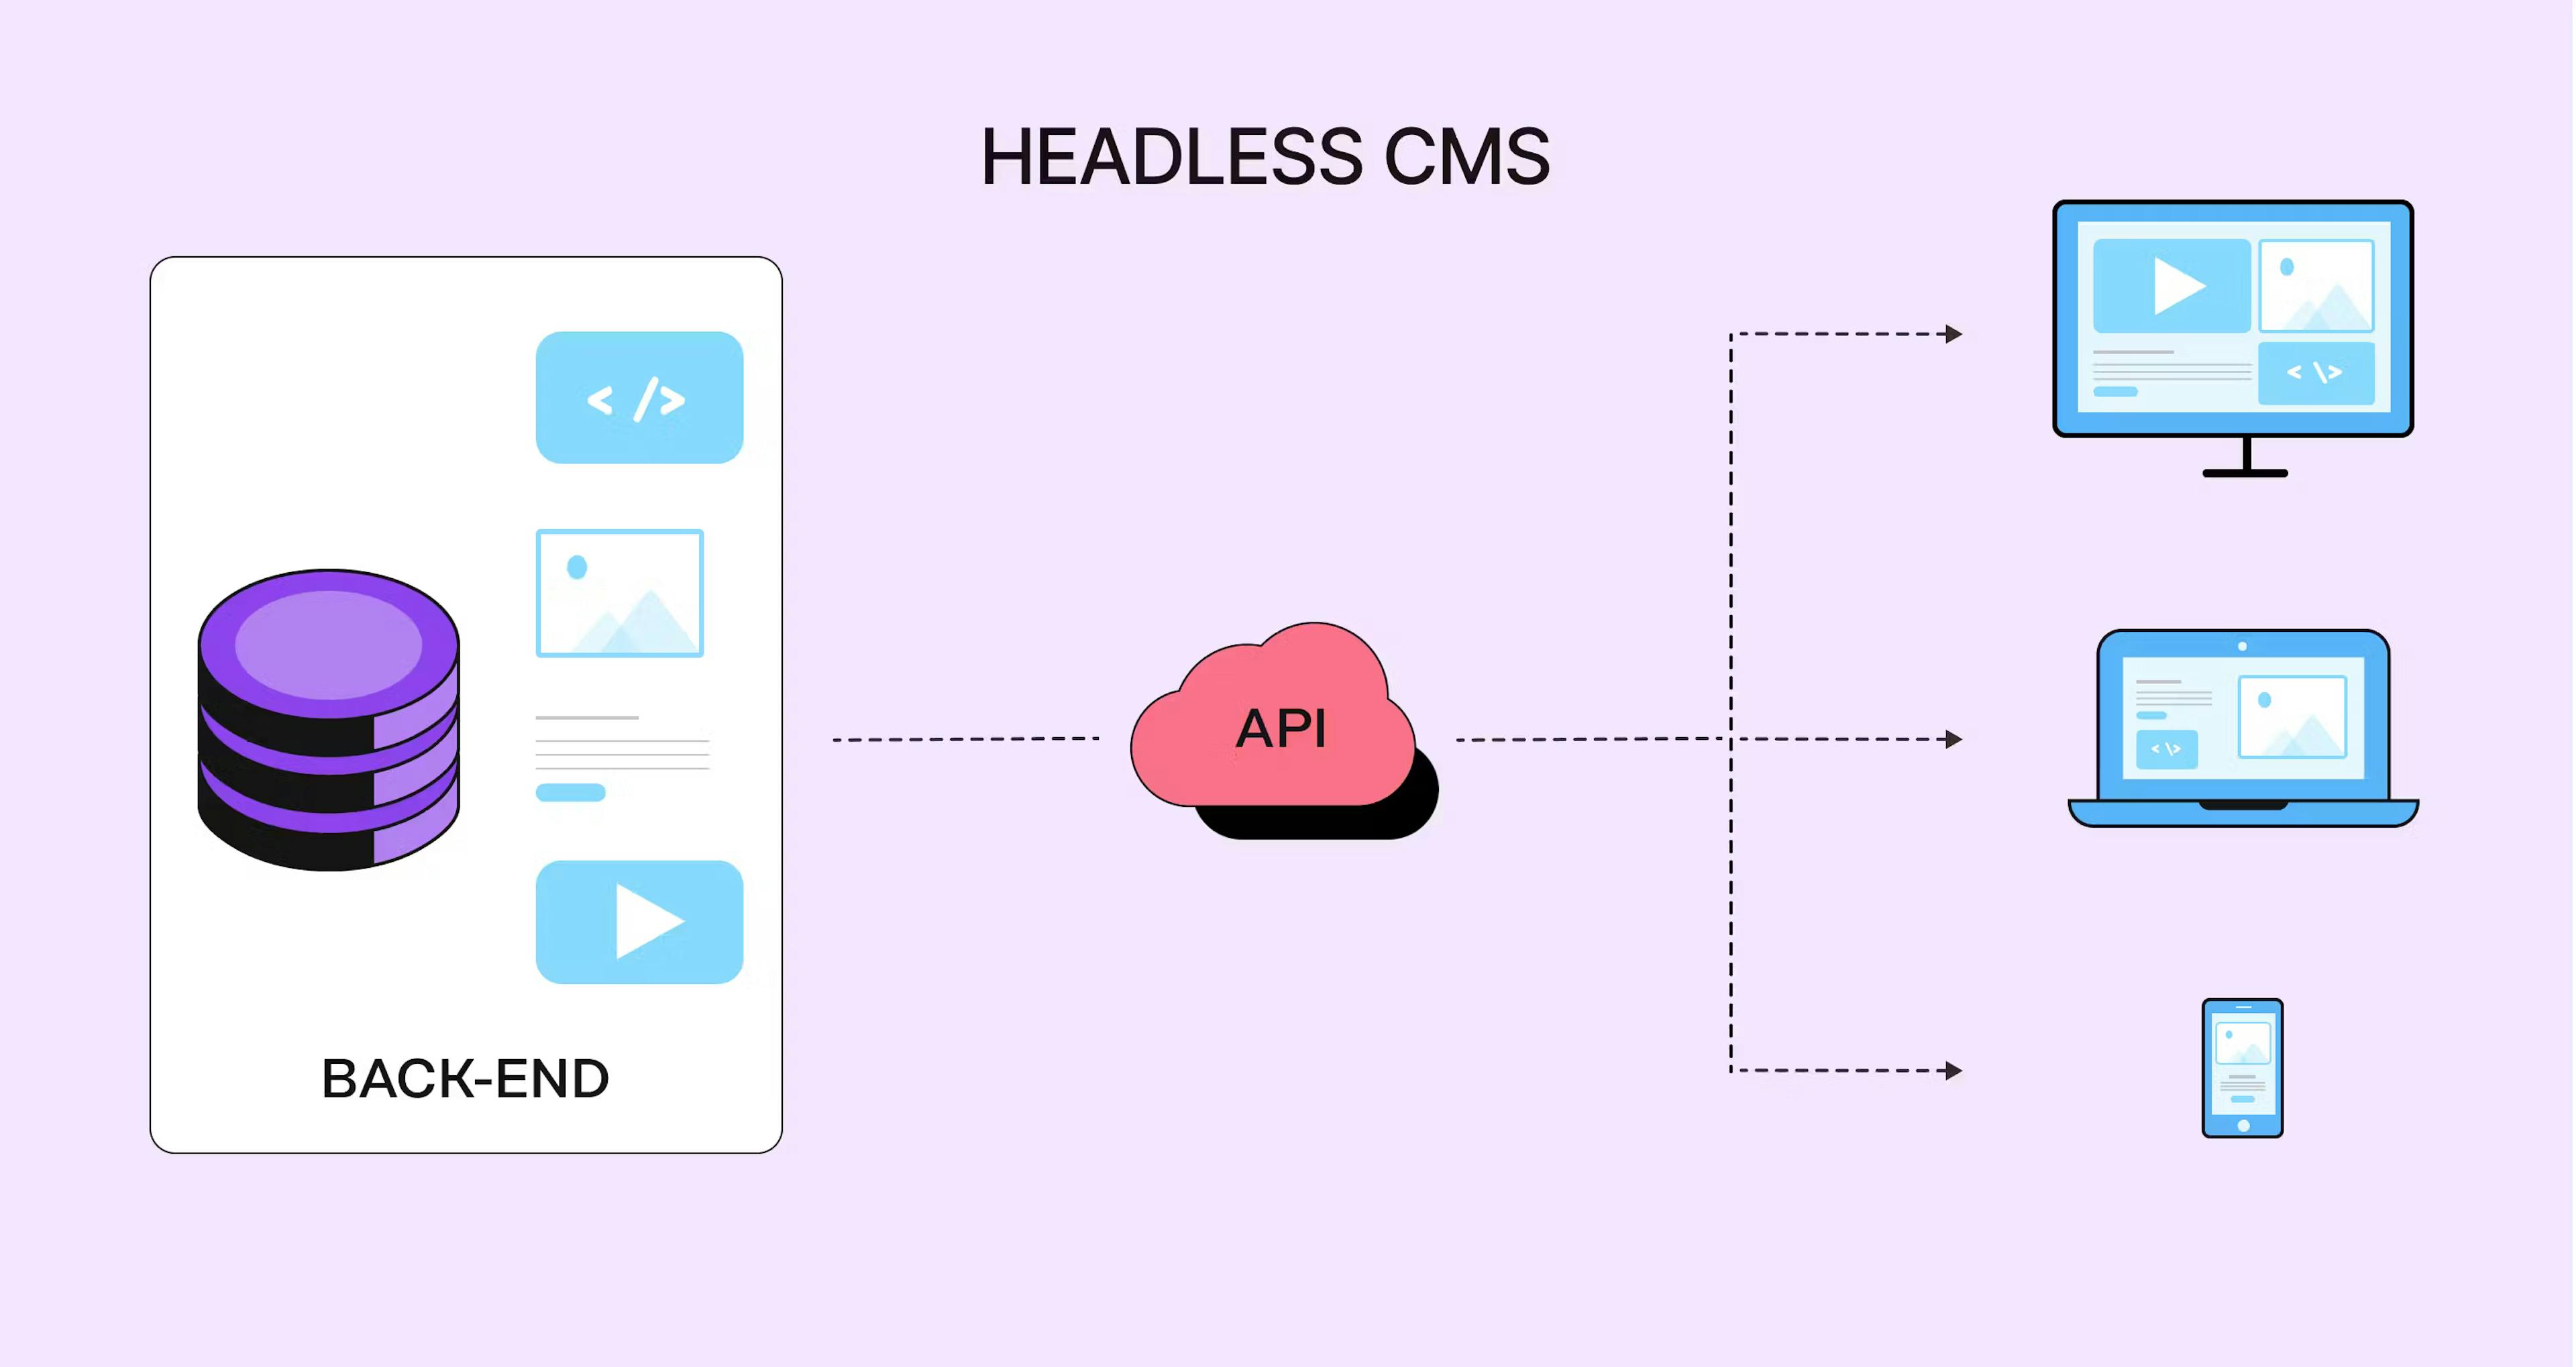 An image of Headless CMS architecture.